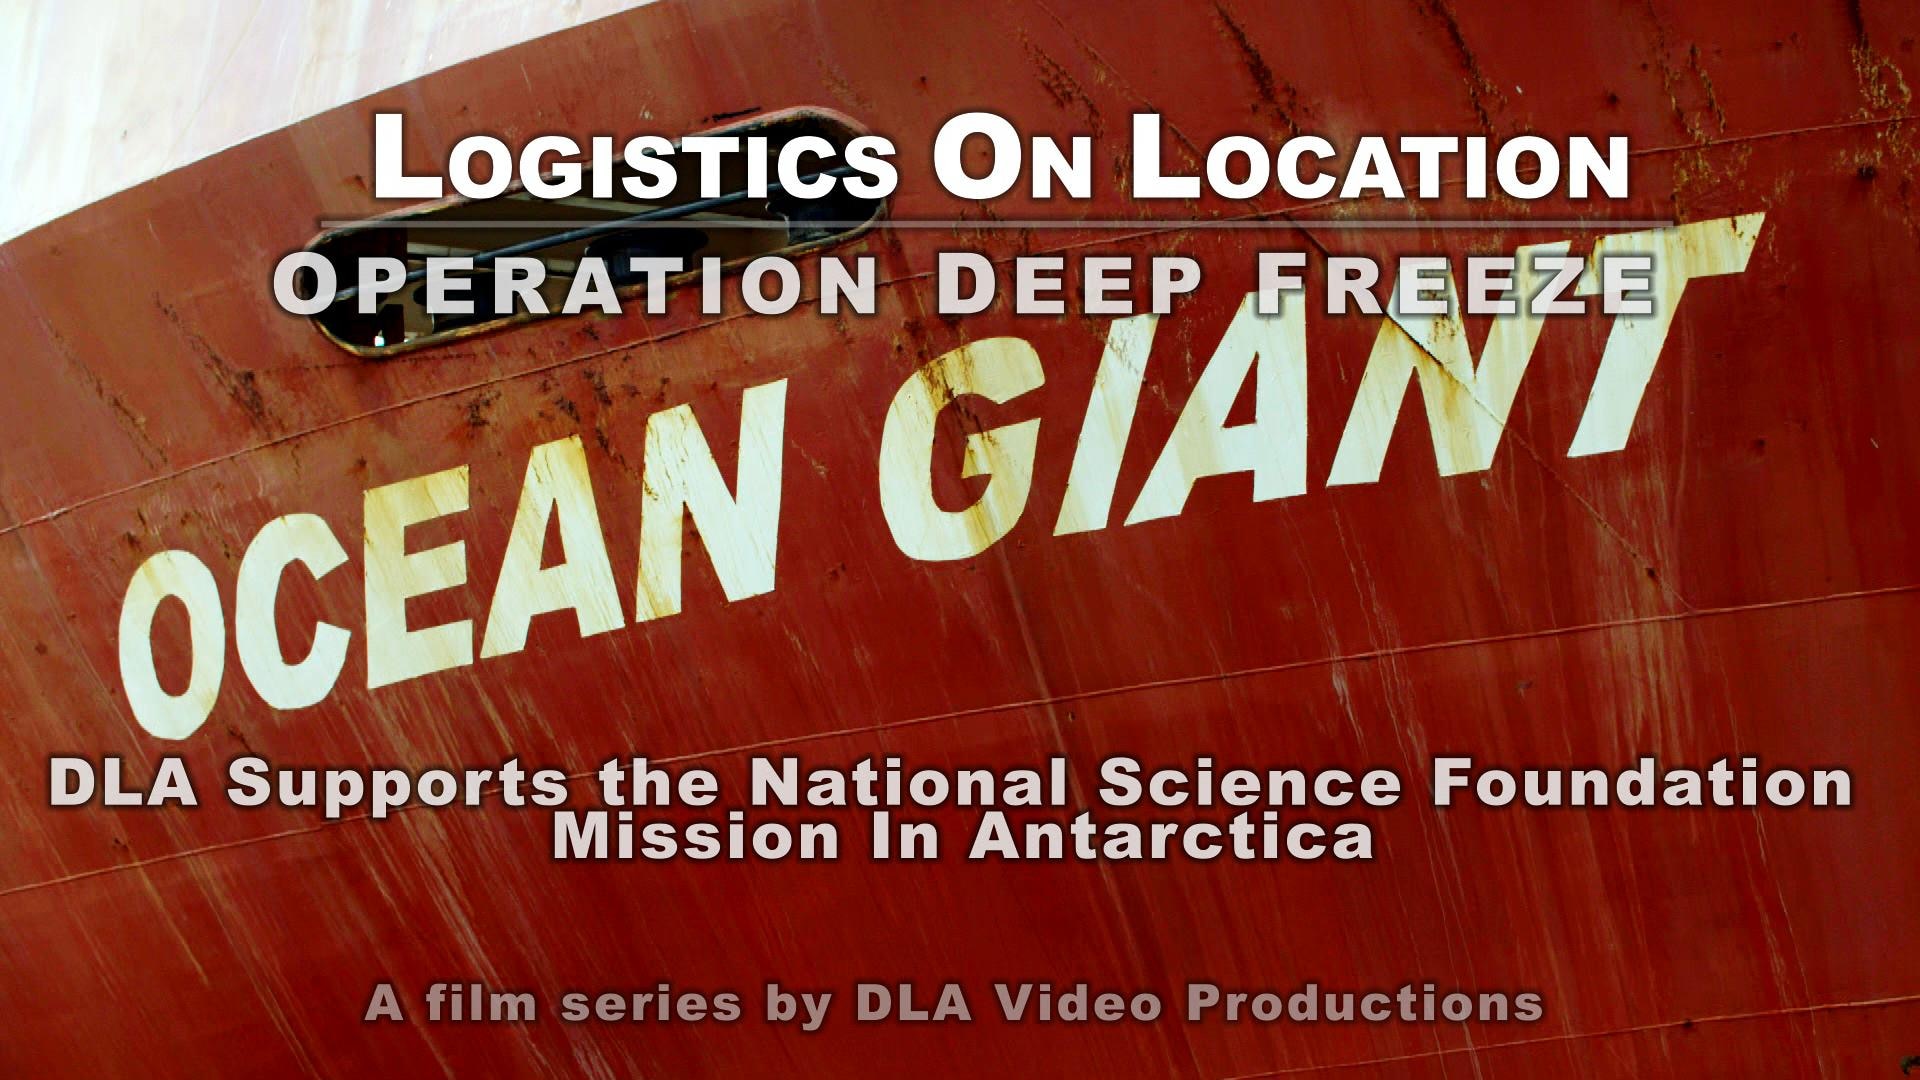 The side of the ship labeled "Ocean Giant," with superimposed text saying "Logistics On Location: Operation Deep Freeze. DLA supports the National Science Foundation Mission in Antarctica